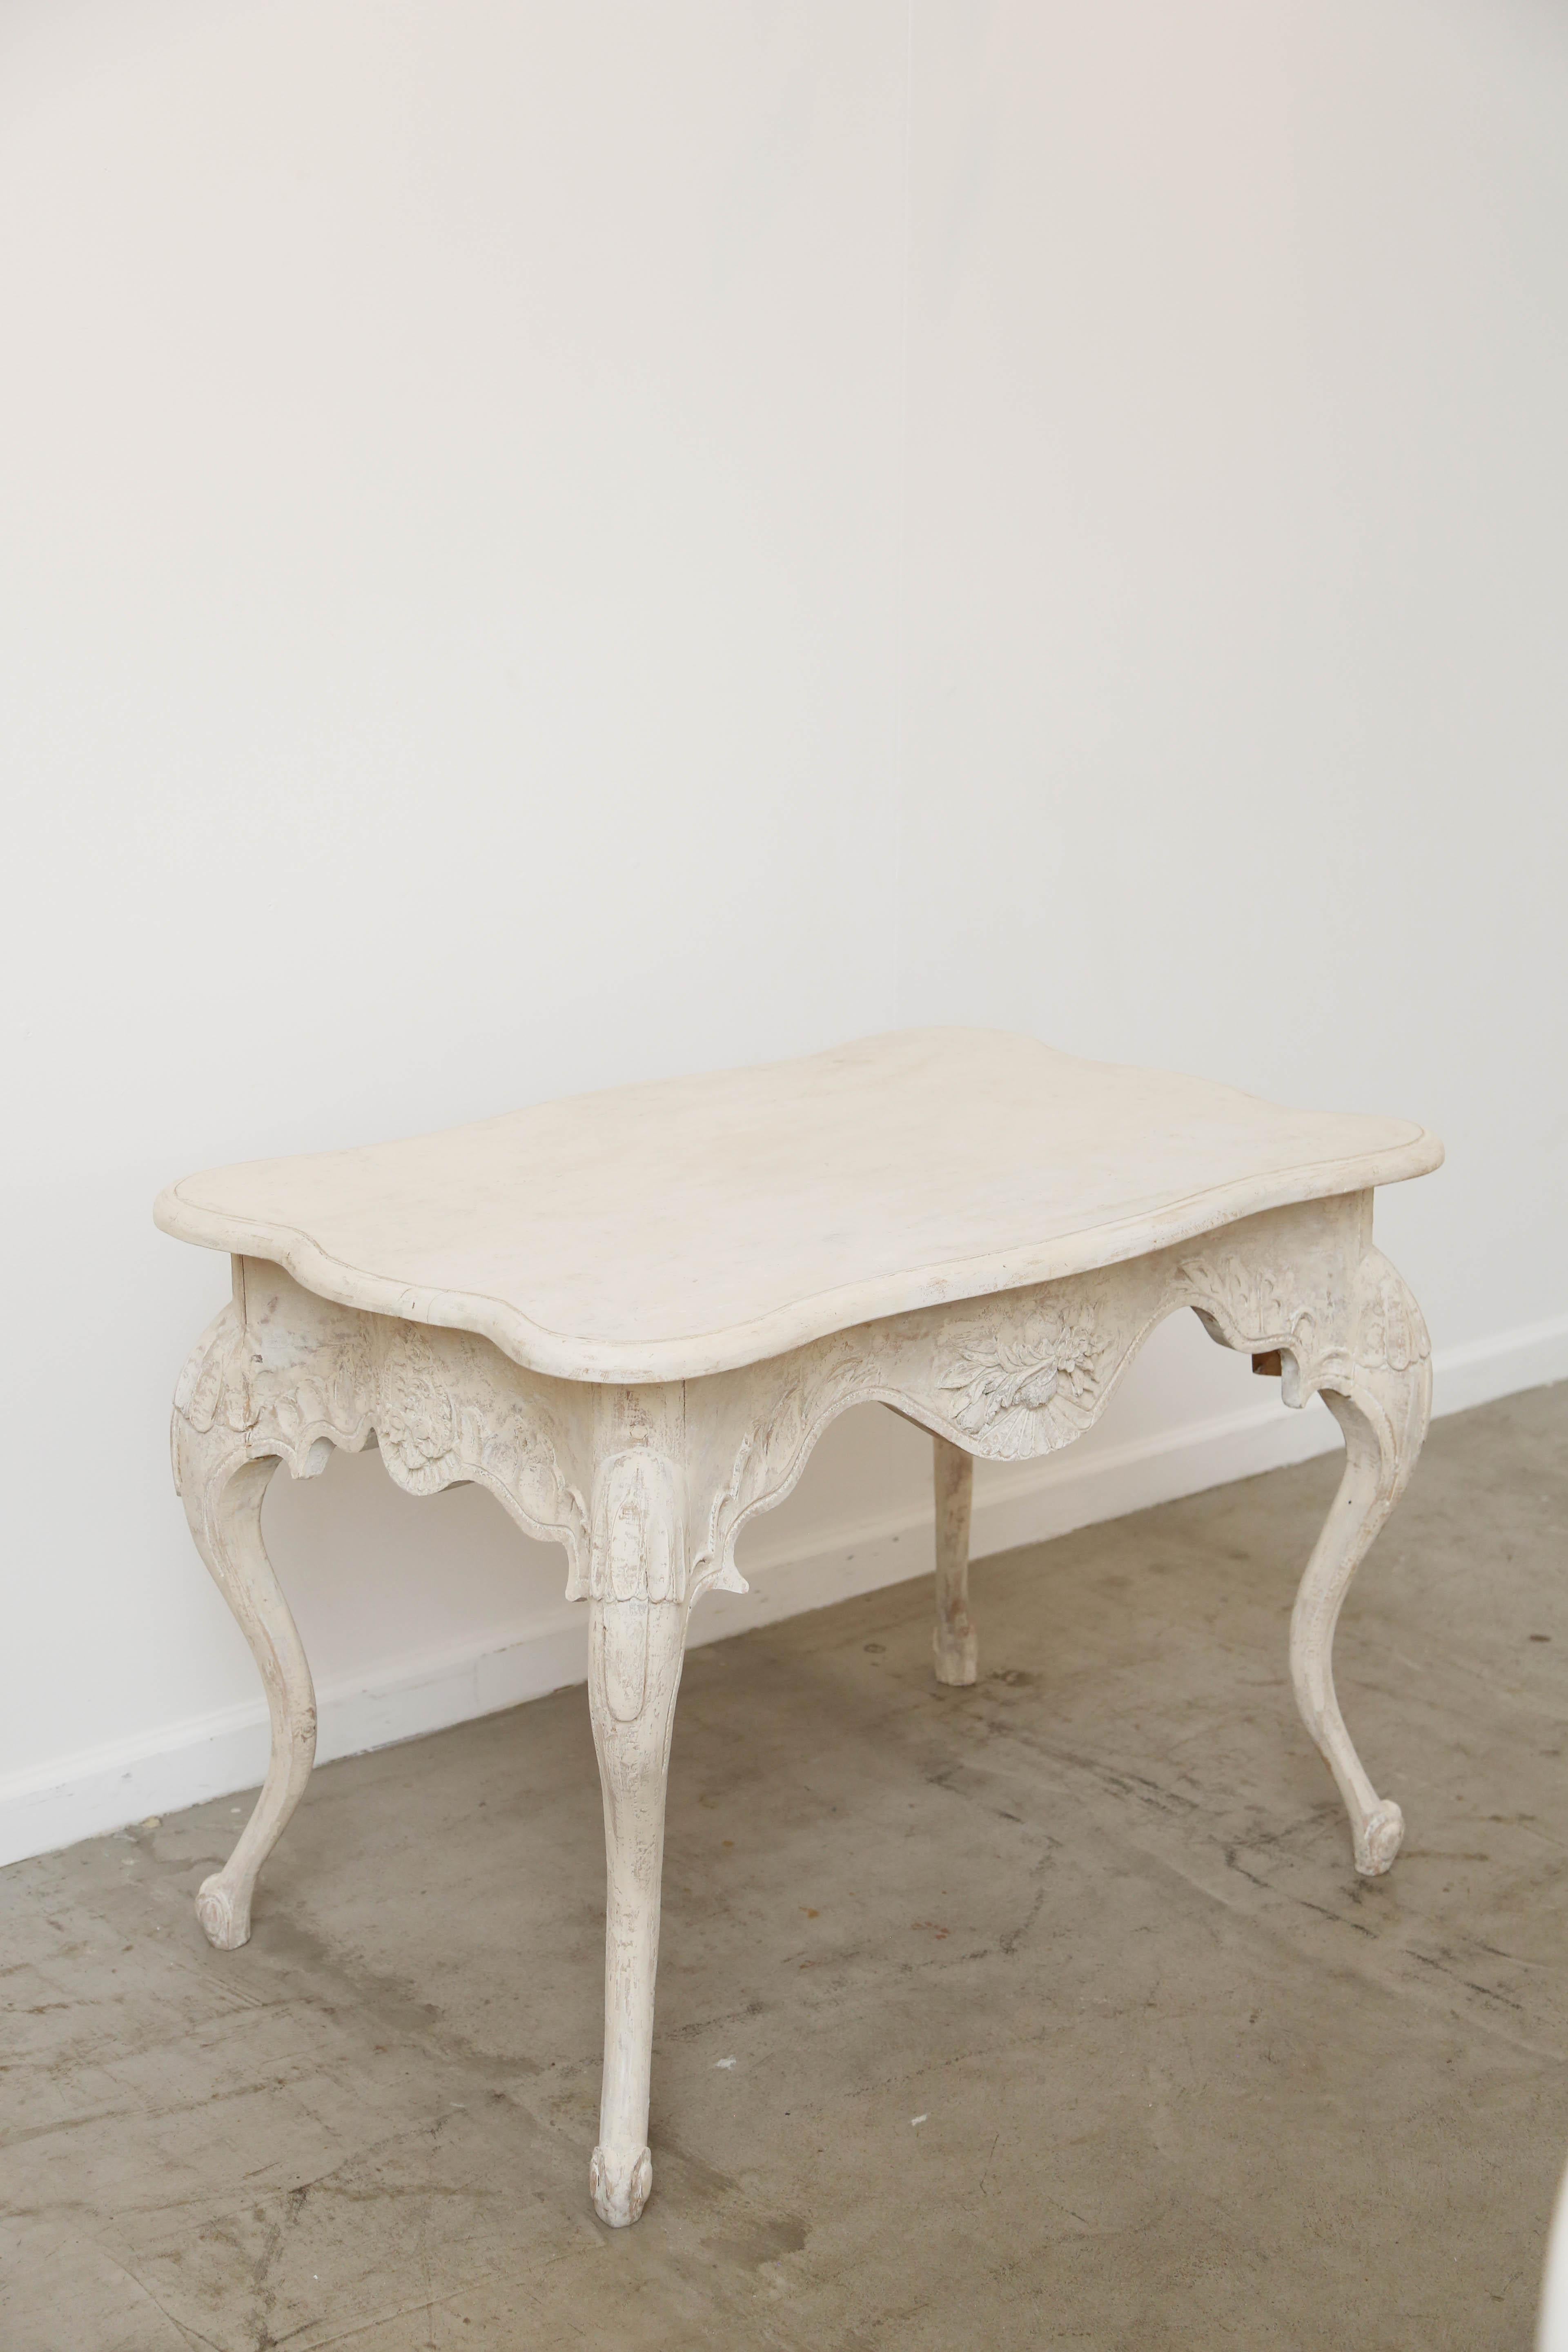 A very elegant antique Swedish Baroque style painted table, with lovely cartouche carving on the apron and leaves carved top each cabriole leg, carved hoof foot on each leg. Top is curved and shaped with a simple semi round edge. Swedish white-cream